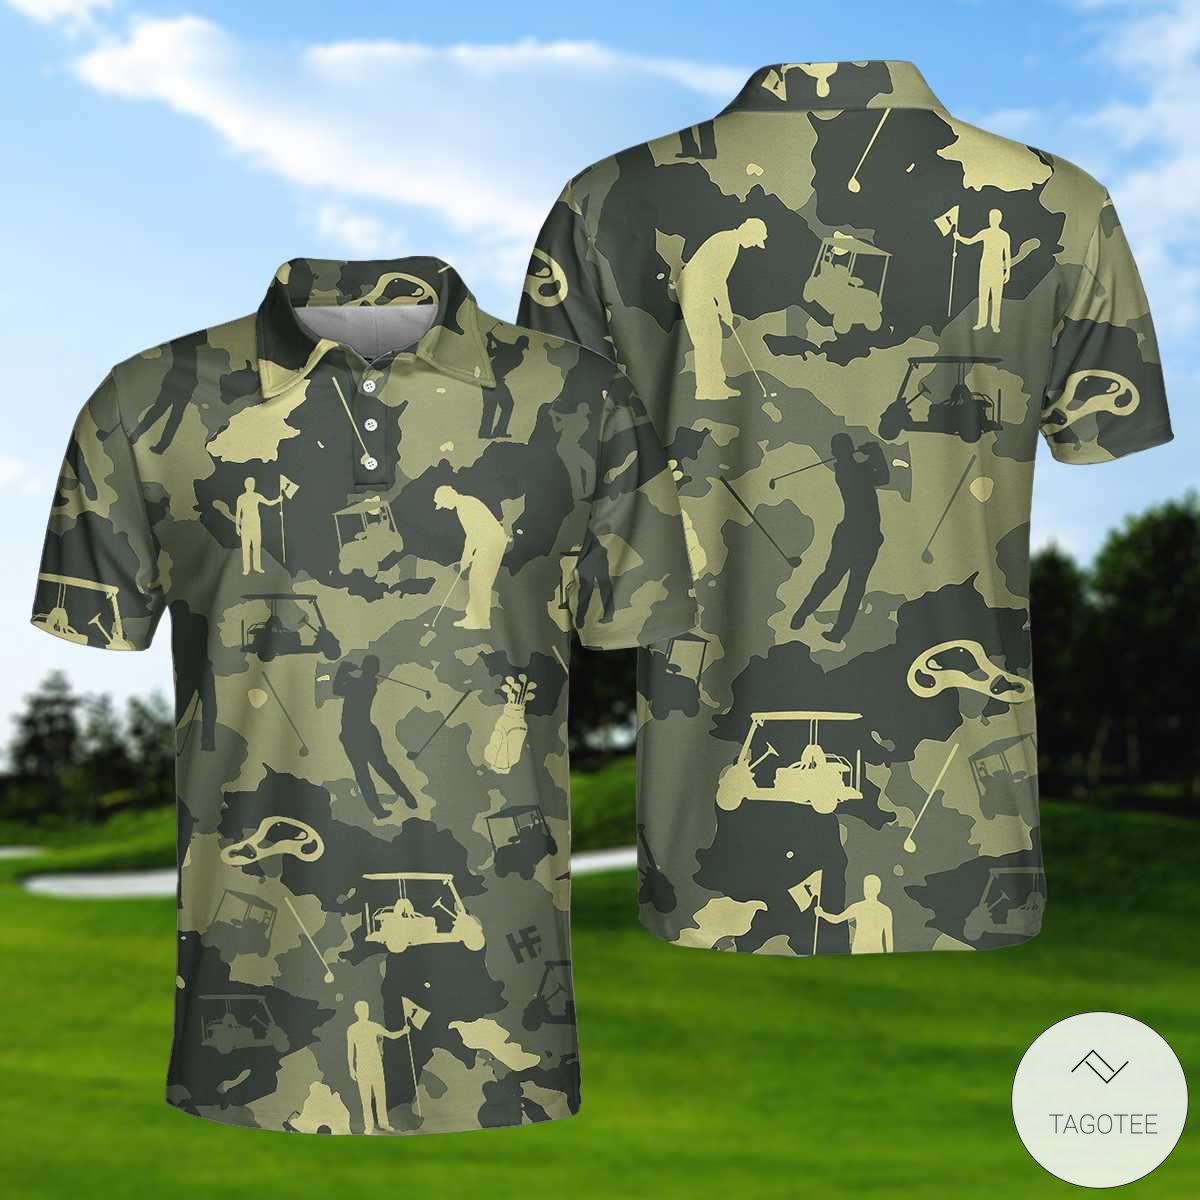 Army-Camouflage-Texture-Golf-Set-Polo-Shirtx